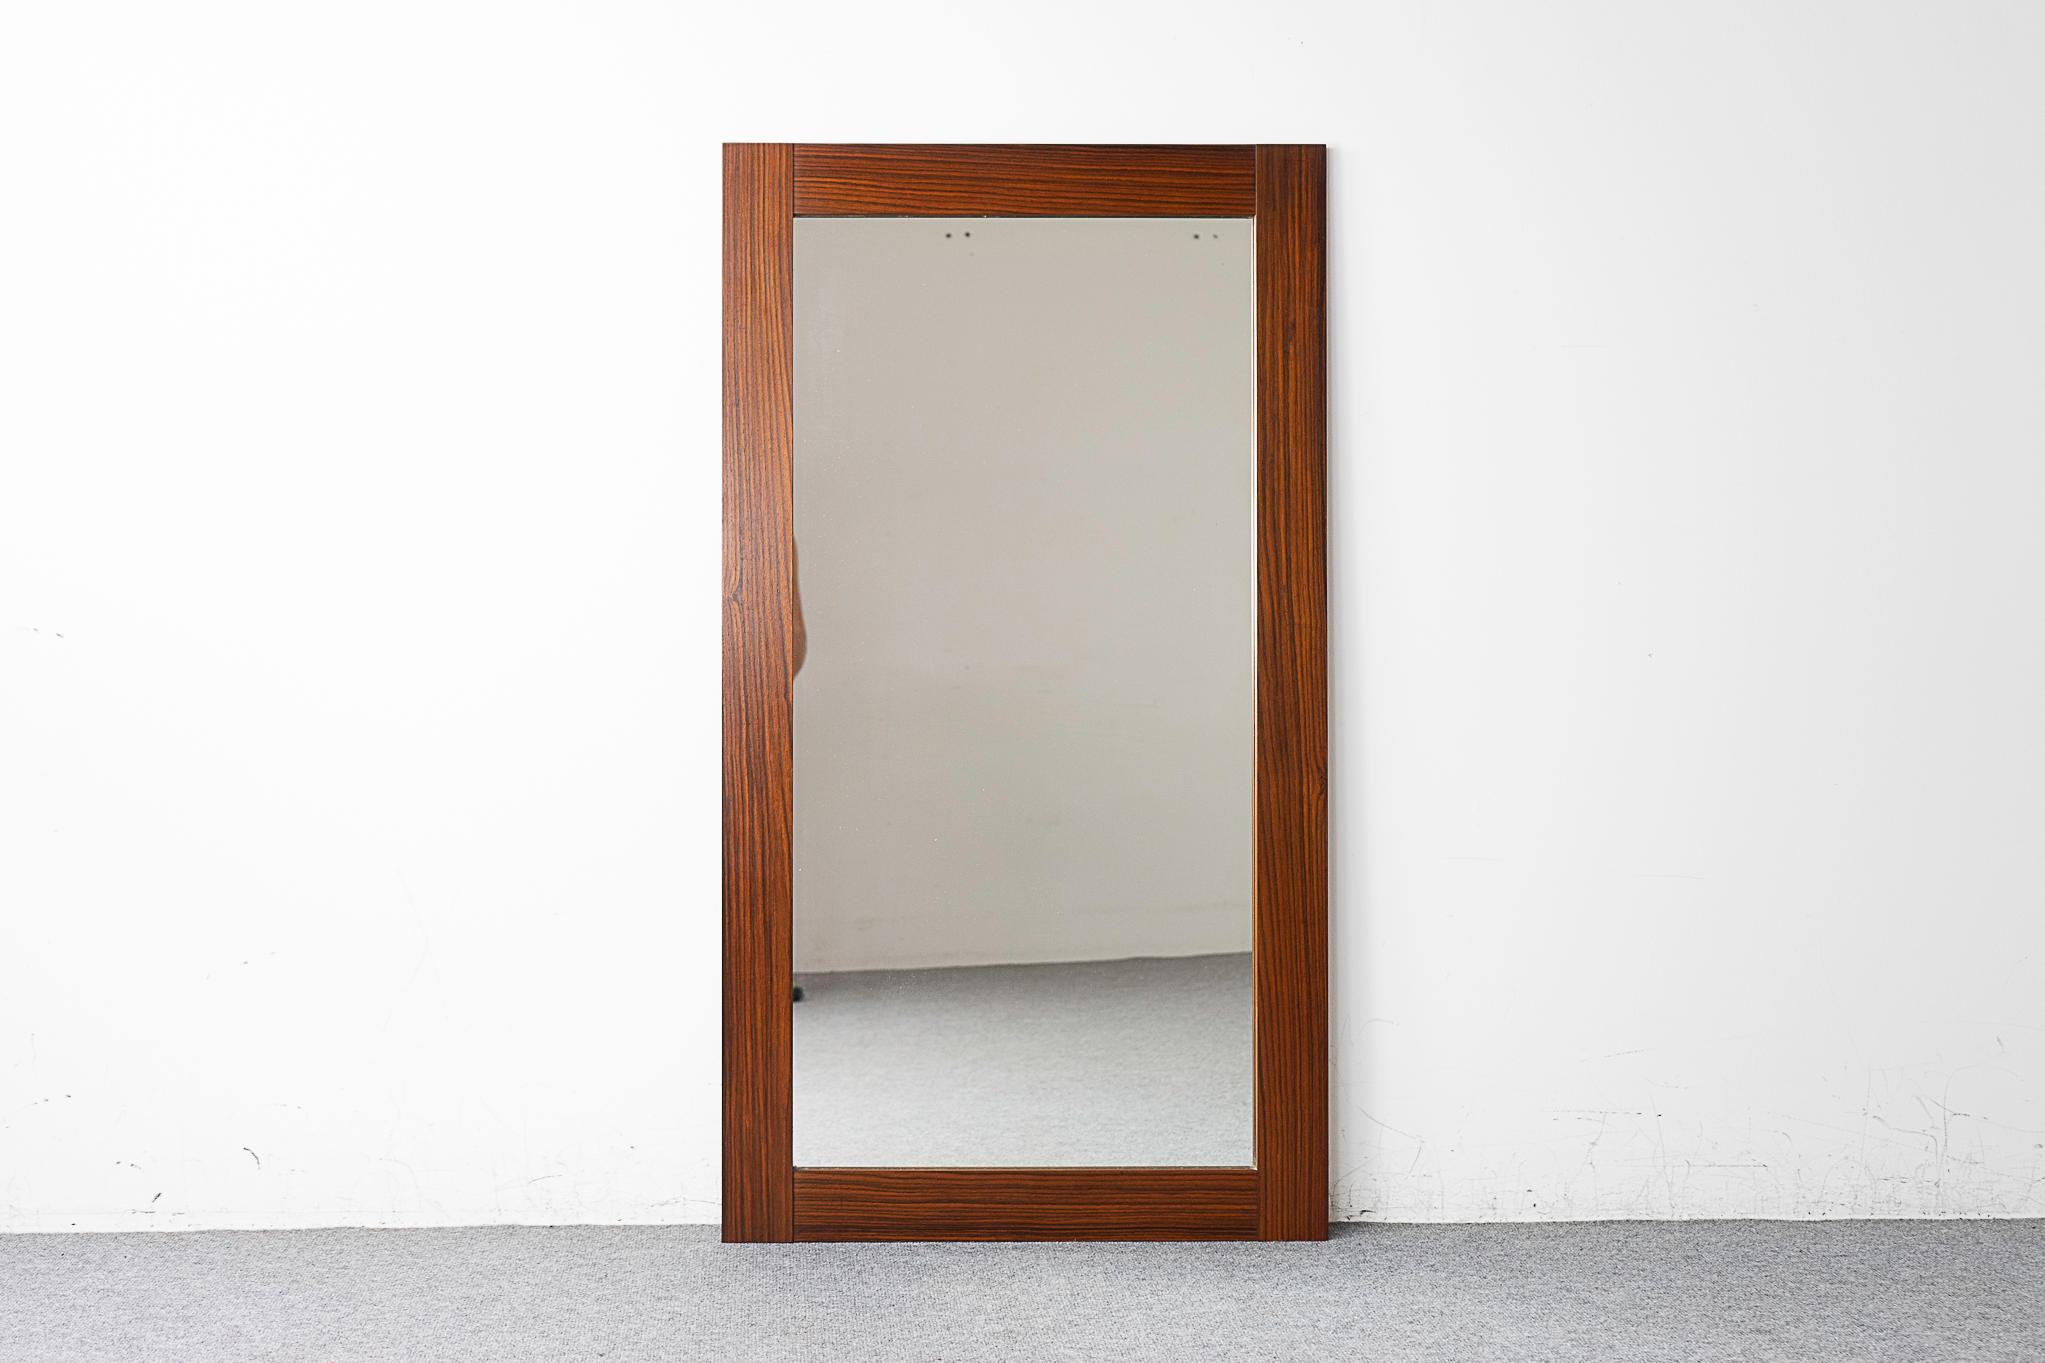 Rosewood mid-century mirror, circa 1960's. Substantial mirror to check your full outfit! Nice grain patterns, original glass is in nice condition, tiny bit of cloudiness. 